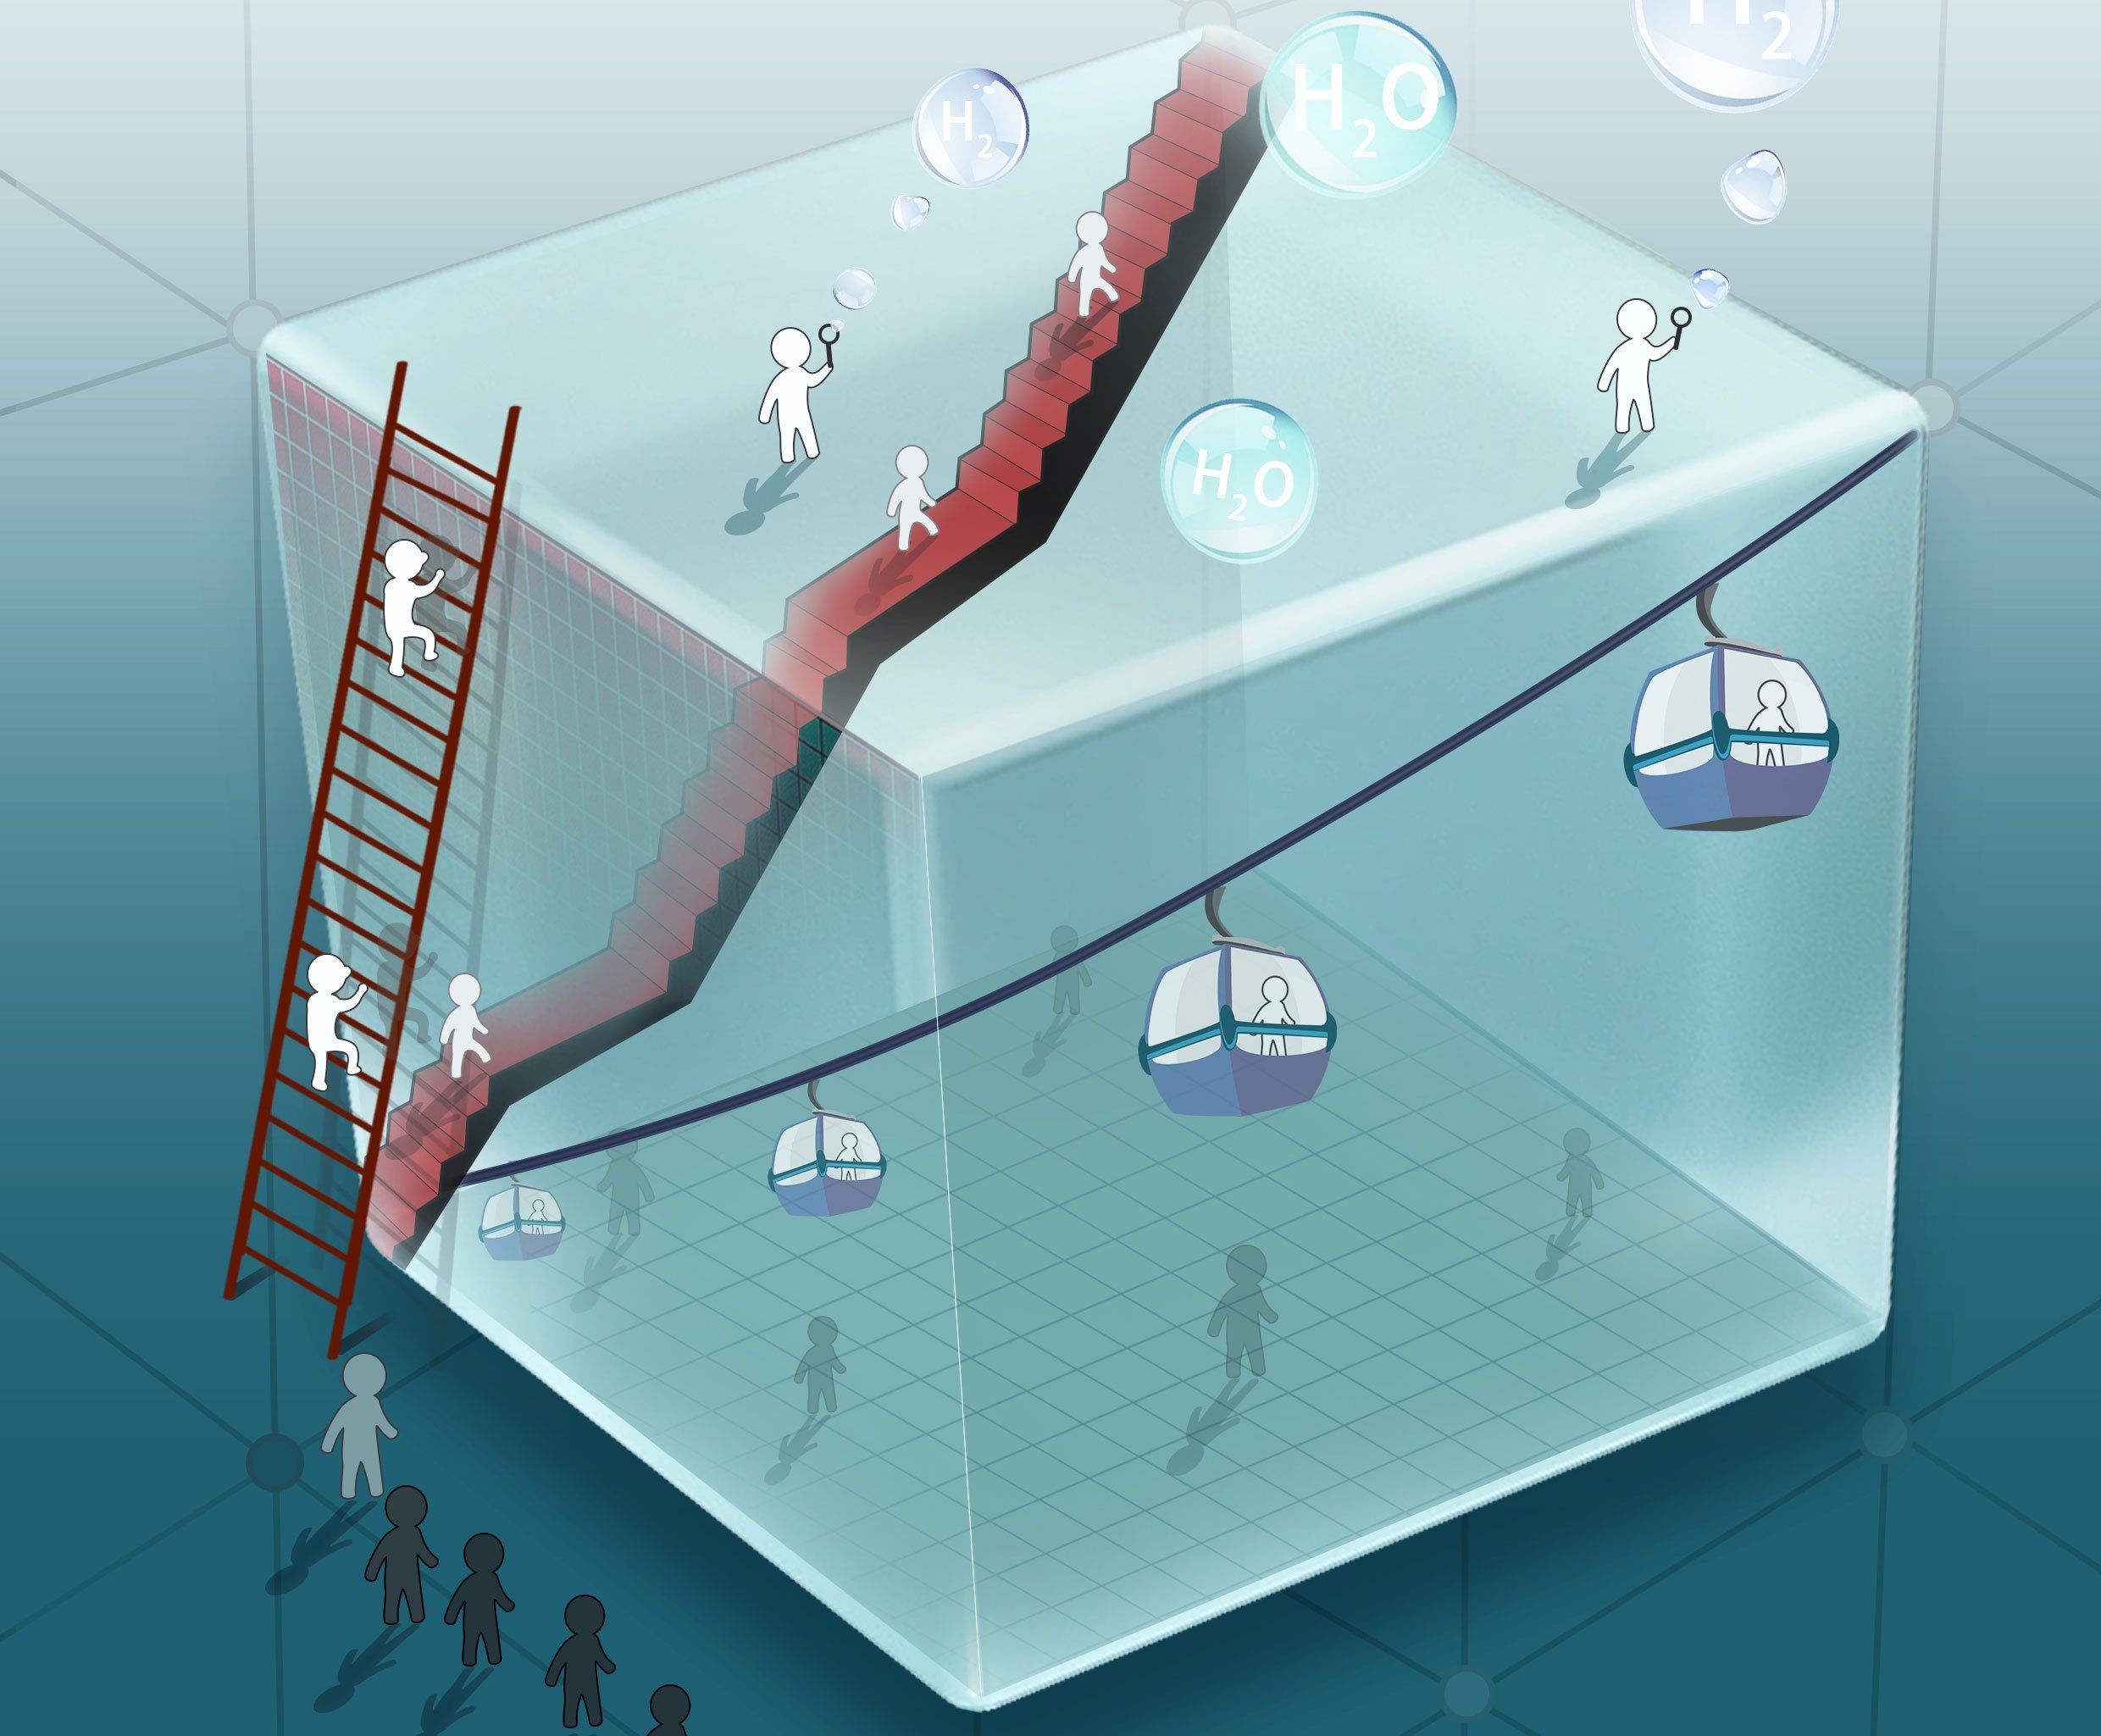 a big blue box with a ladder with a line of people behind it, a cord with a gondola and person inside and red stairs inside the box with people climbing them, people on top of structure blowing bubbles